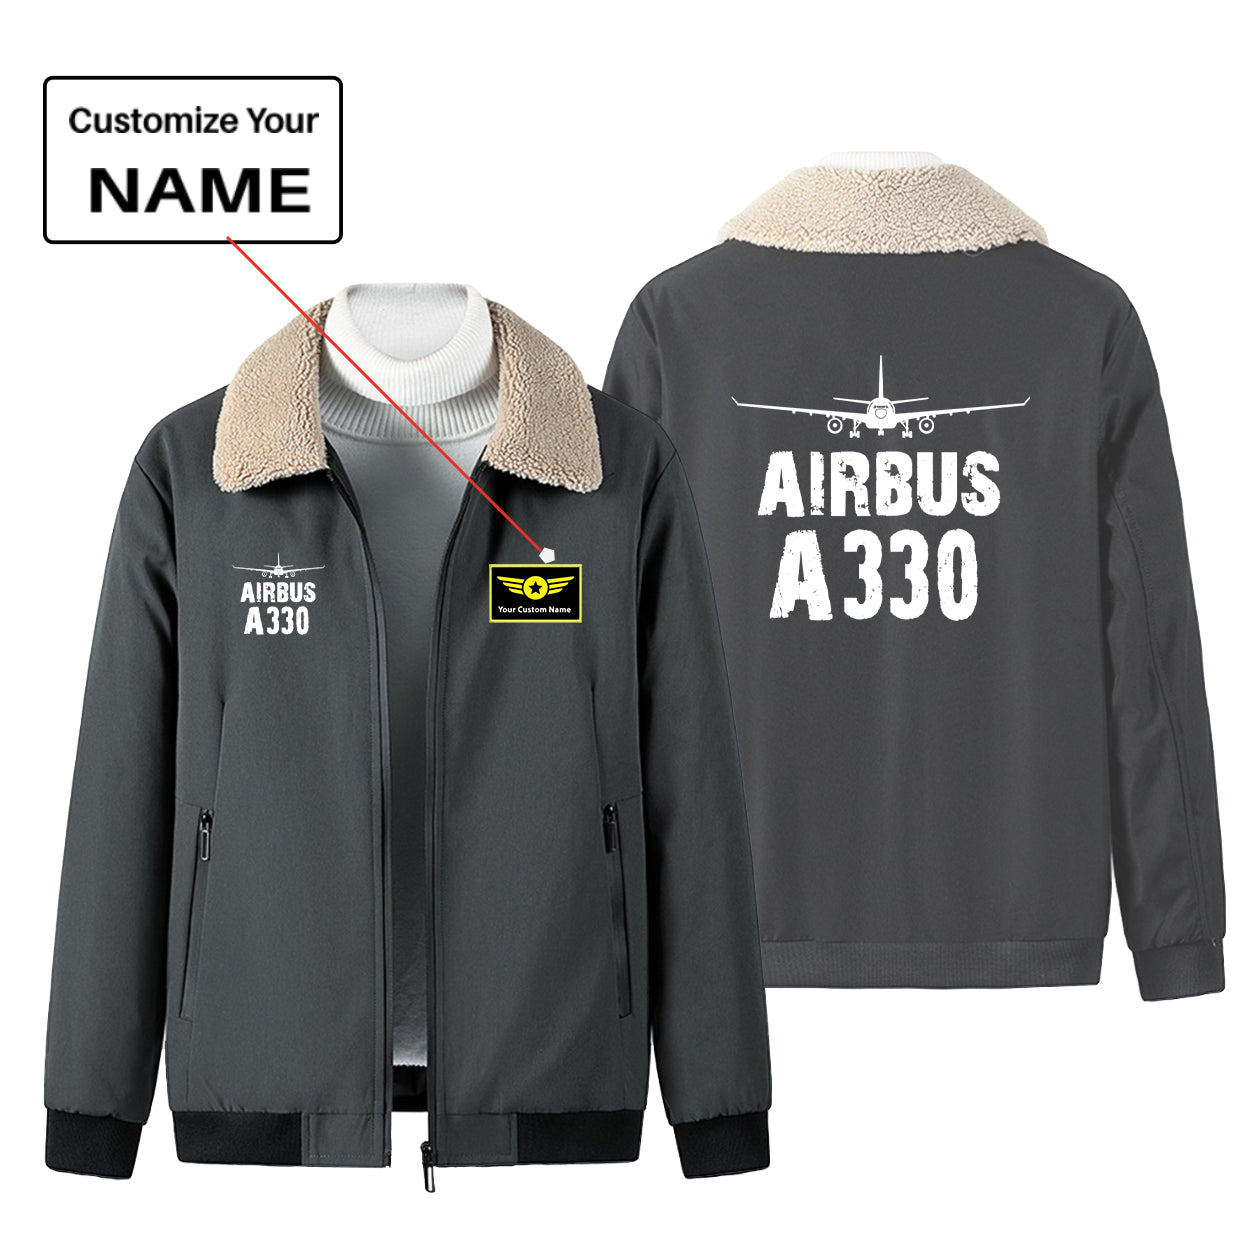 Airbus A330 & Plane Designed Winter Bomber Jackets